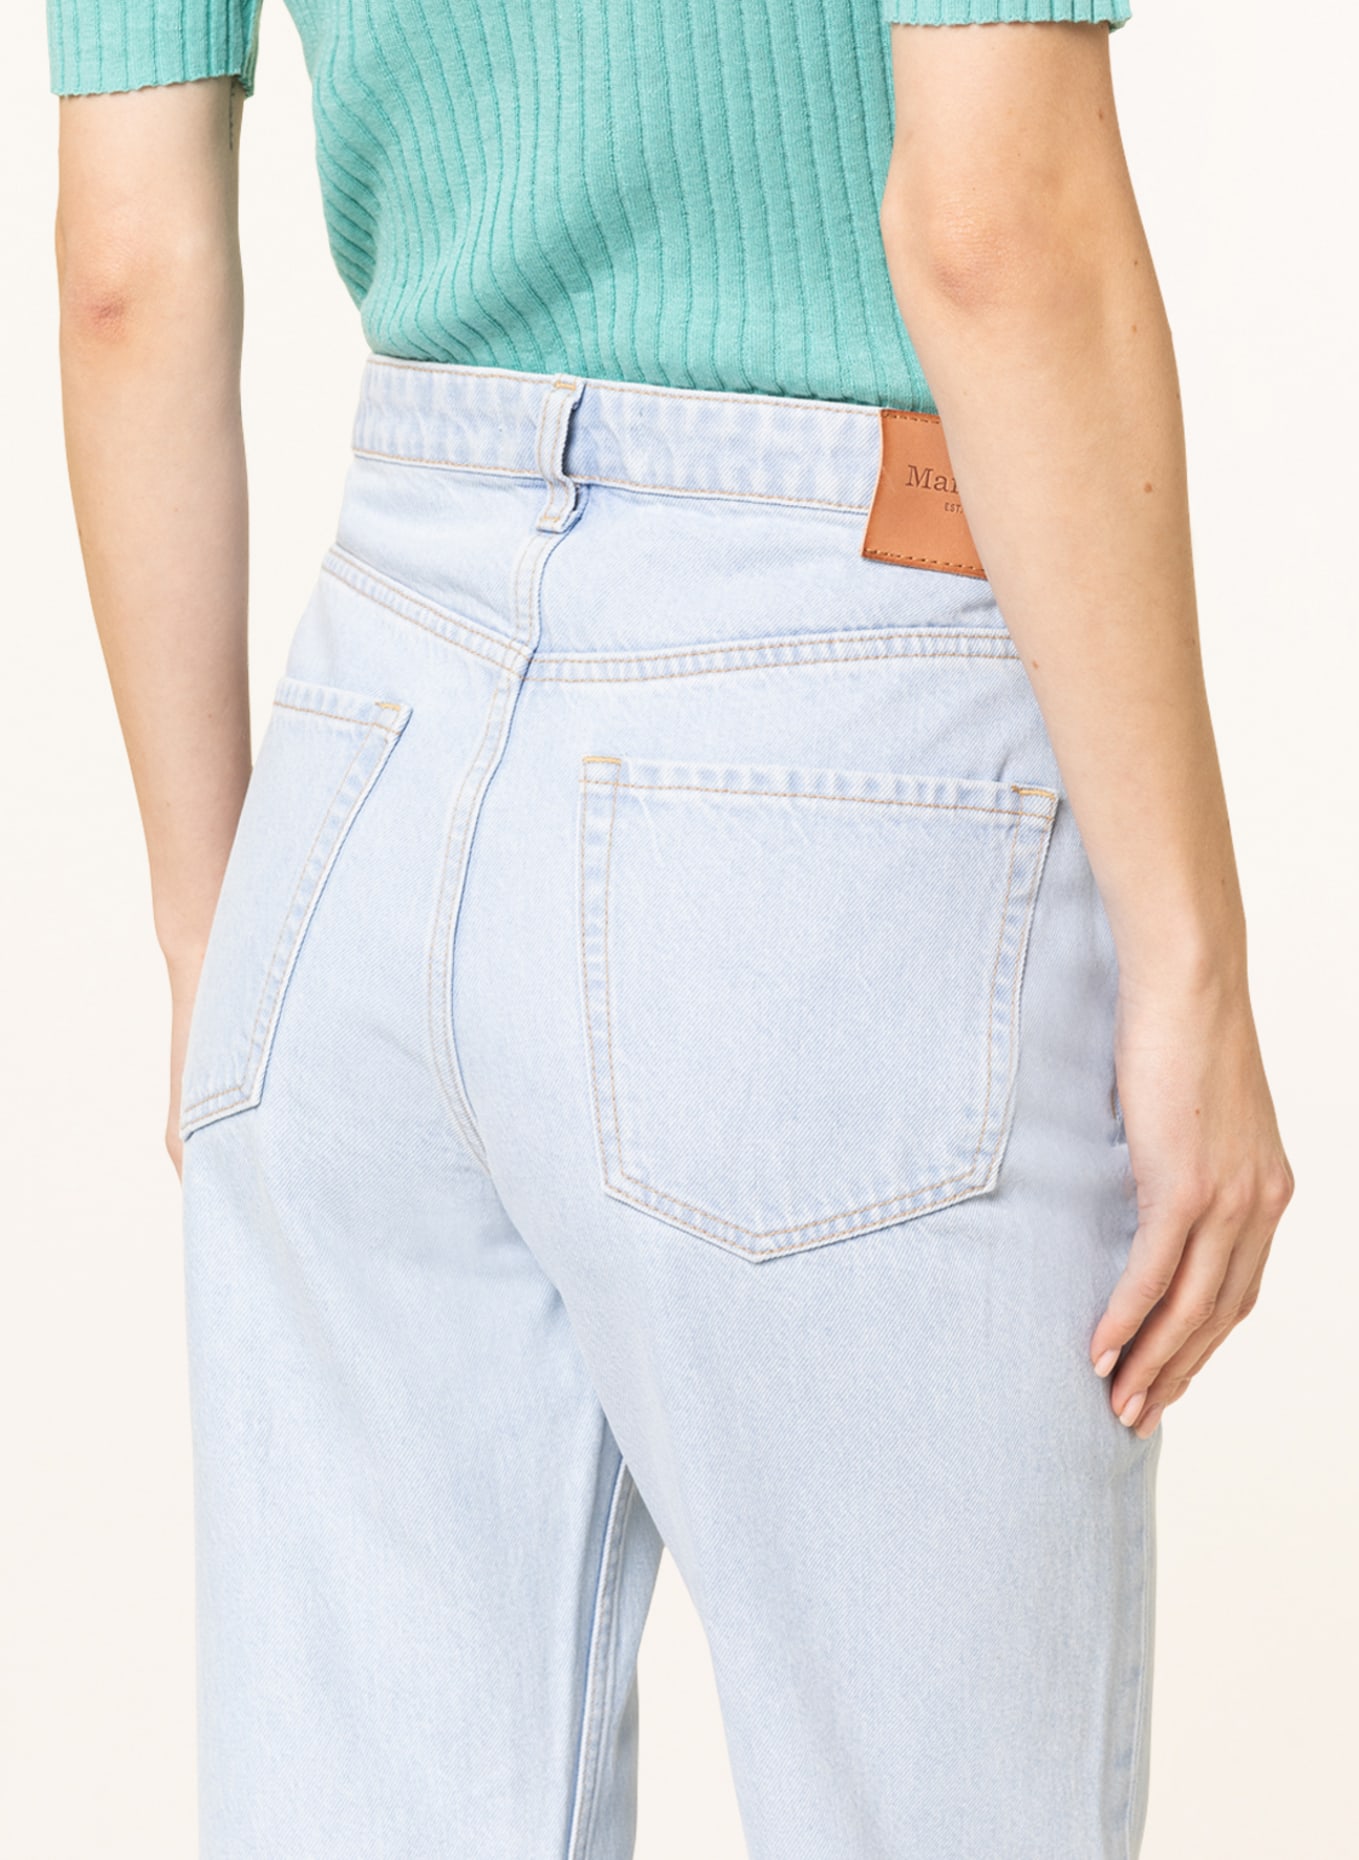 Marc O'Polo Straight jeans, Color: 001 Clean bright ice blue wash (Image 5)